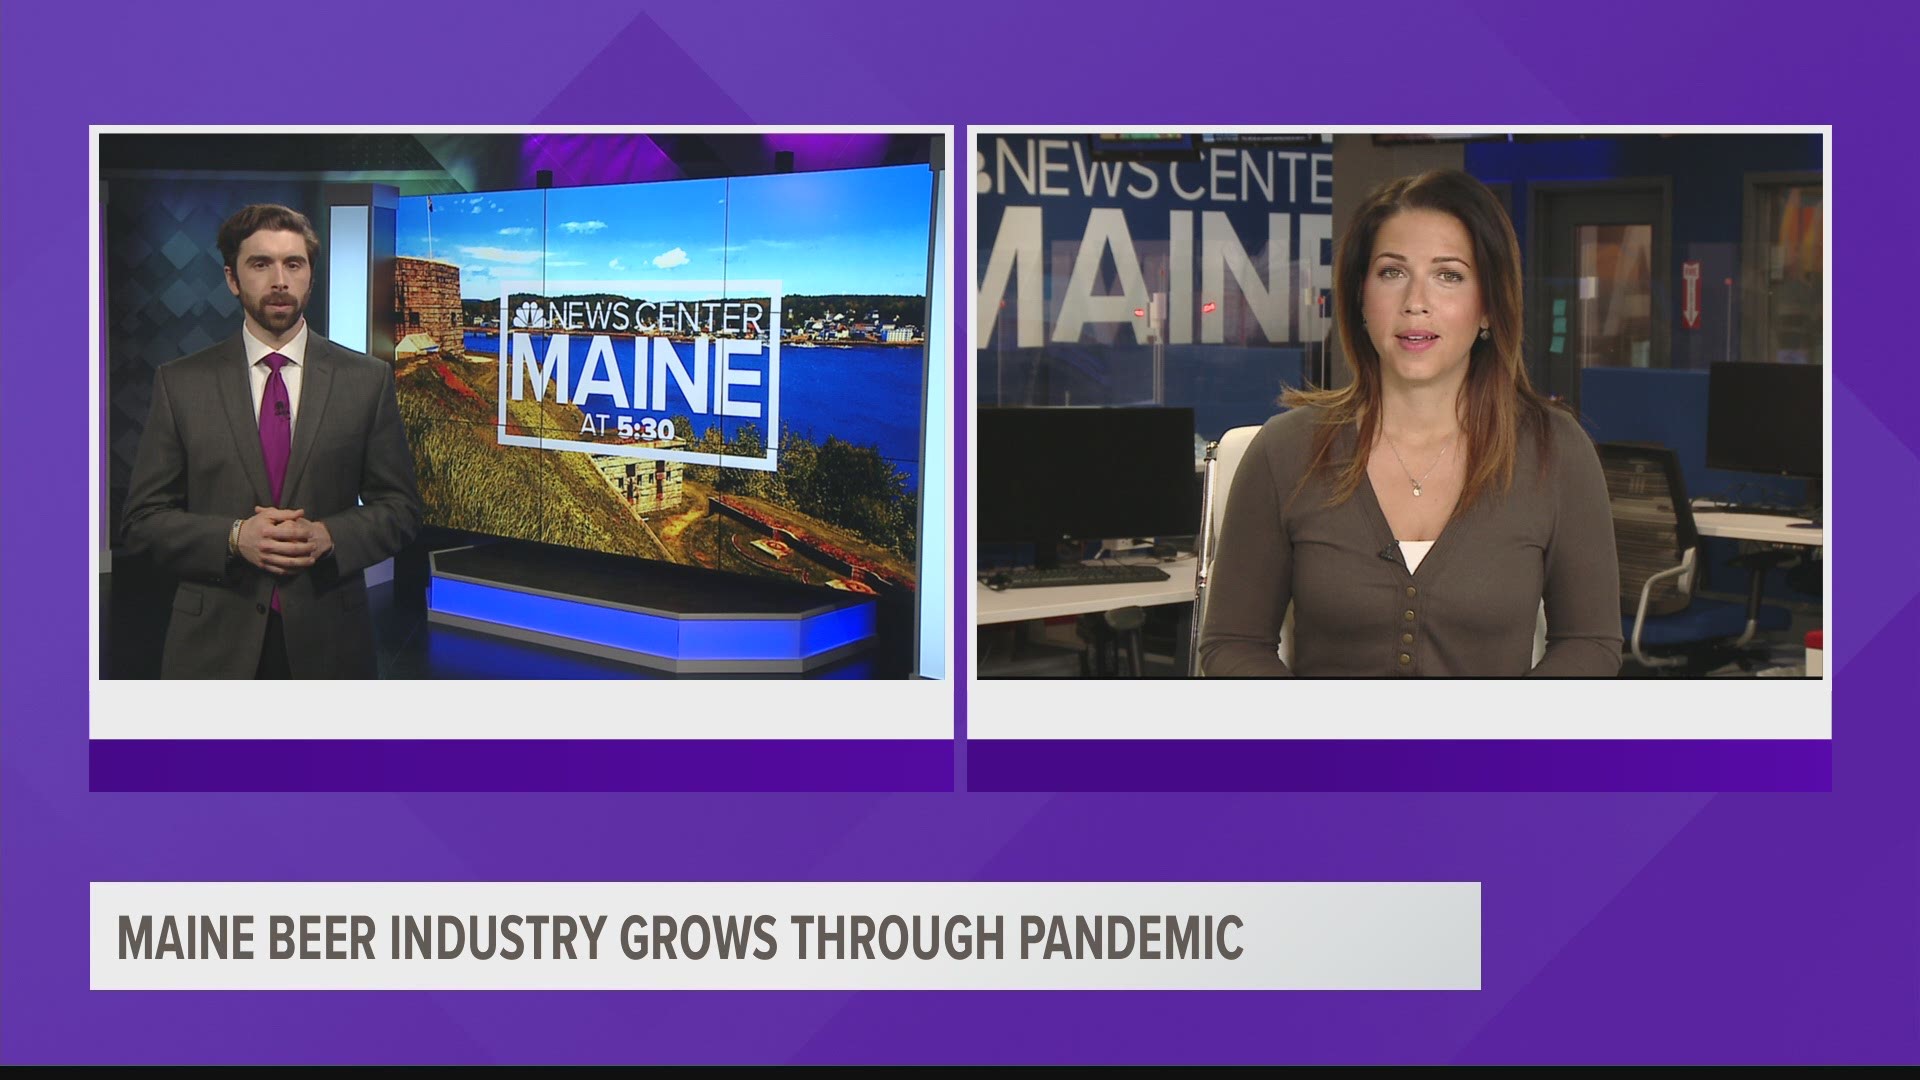 Maine breweries say they're seeing a rise in customers lately, and according to census data, the state now has more breweries per capita than anywhere else.